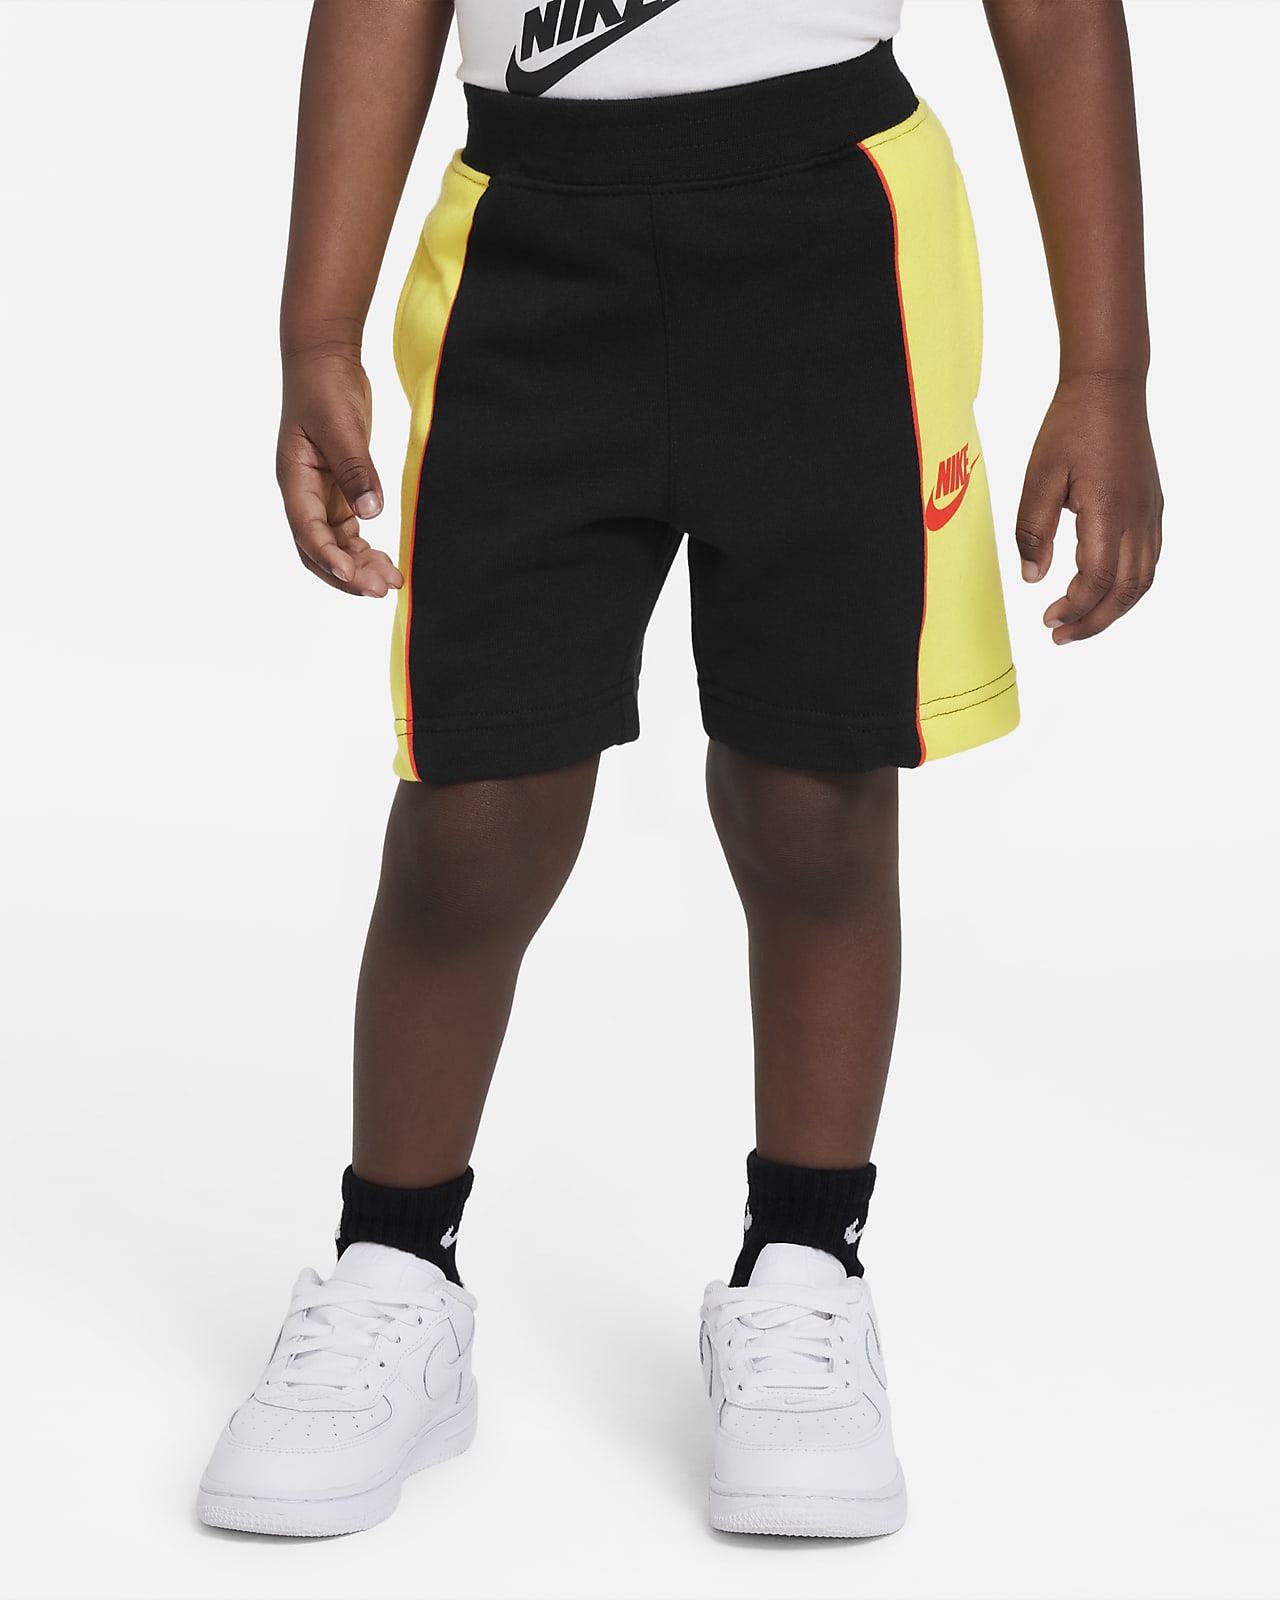 Nike Let's Roll Towel Terry Set Younger Kids' 2-piece Shorts Set